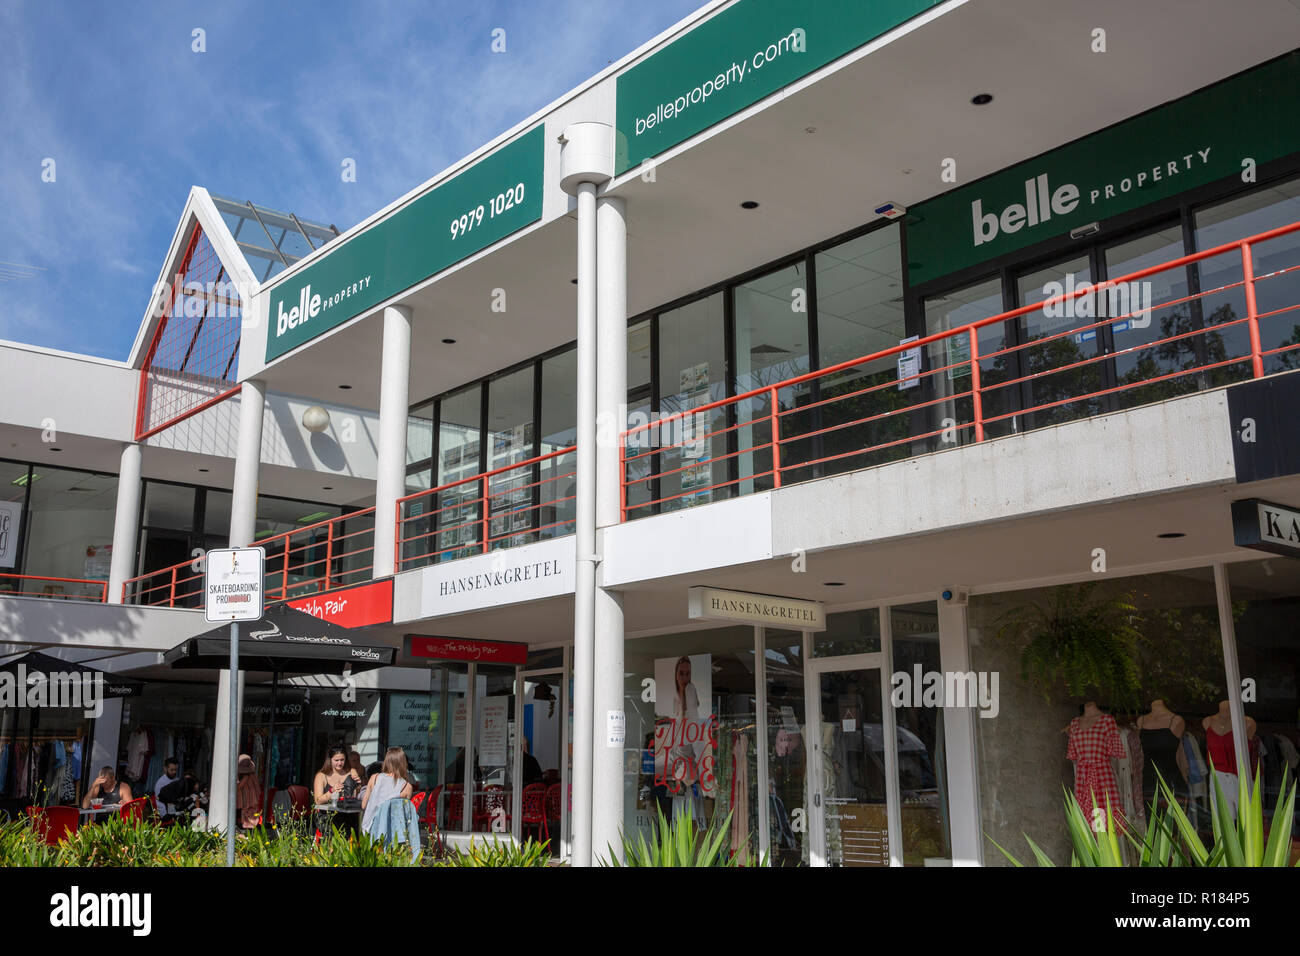 Mona Vale a suburb in Sydney northern beaches and a local real estate office for Belle Property,Sydney,Australia Stock Photo